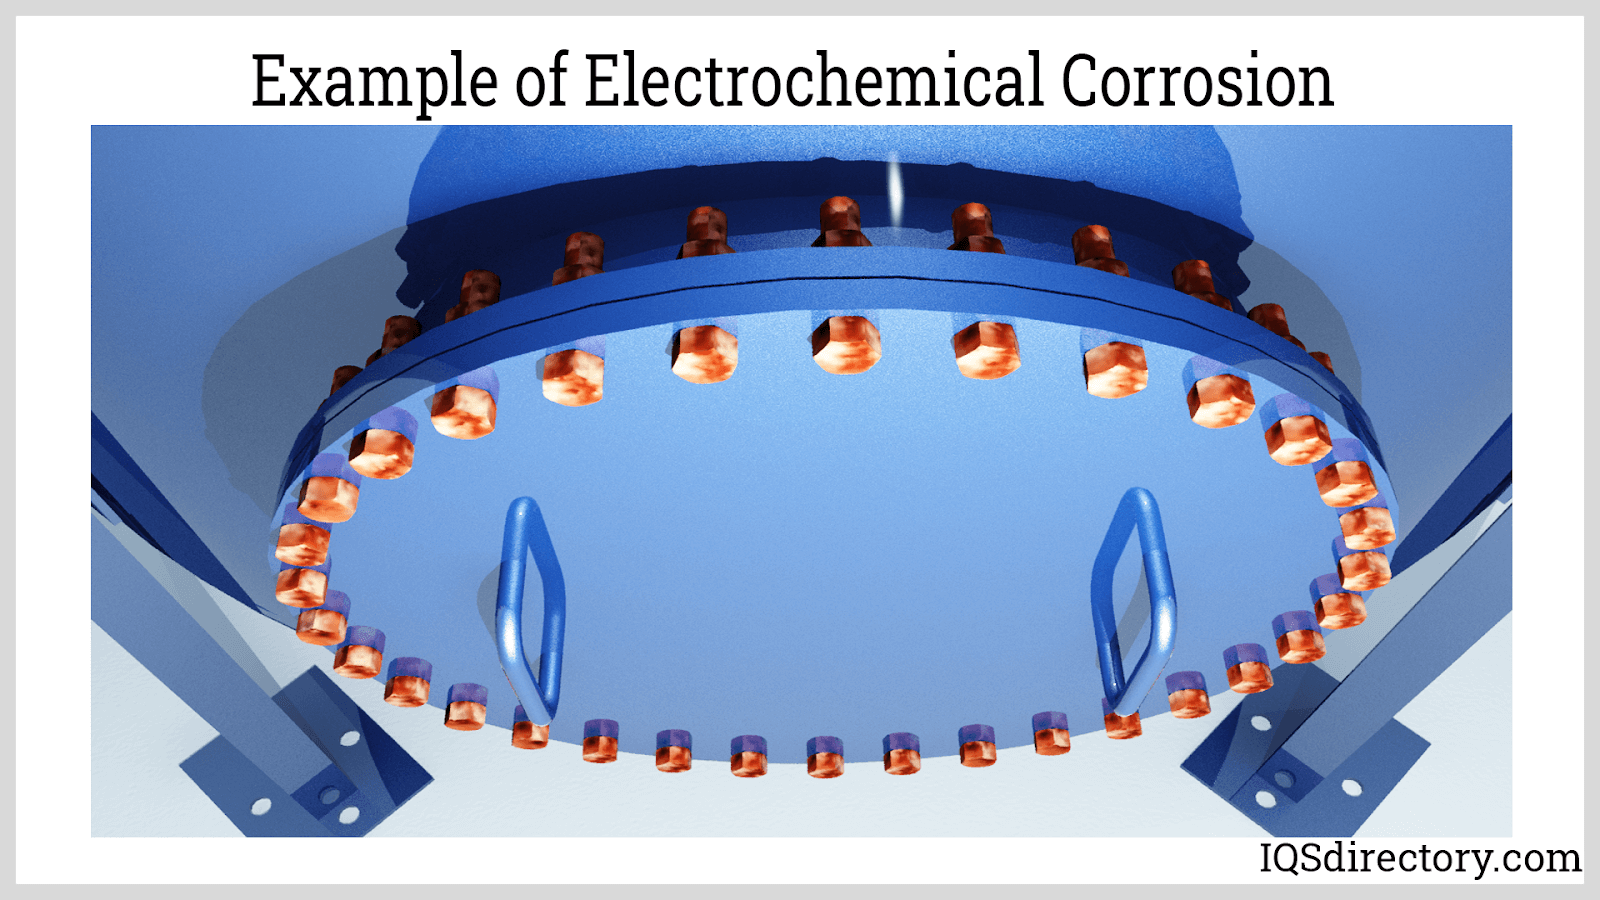 Example of Electrochemical Corrosion